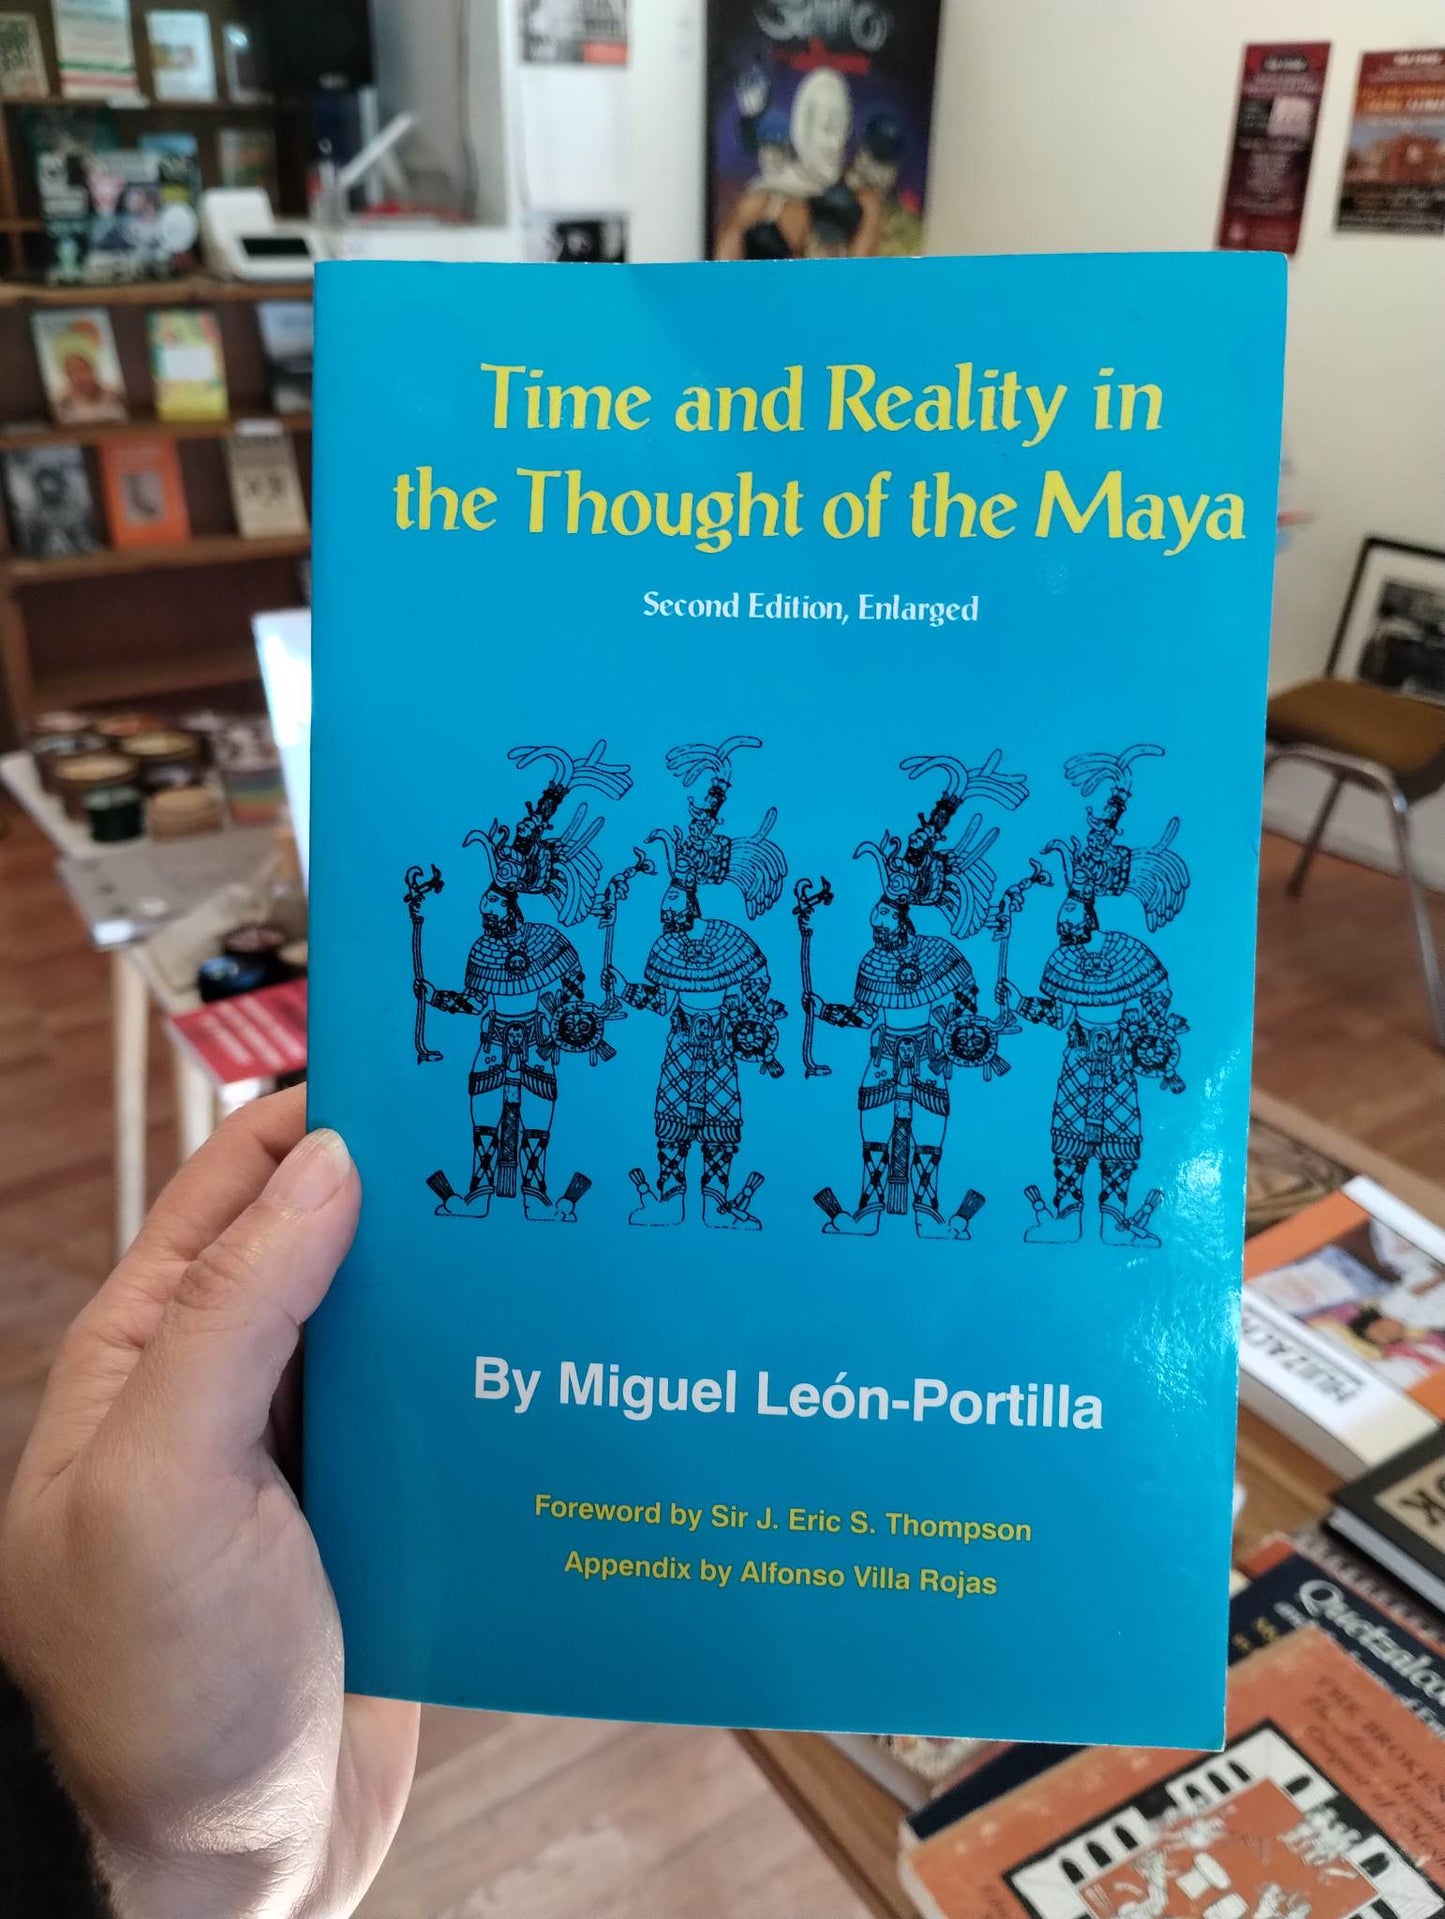 Time and Reality in the Thought of the Maya by Miguel León-Portilla